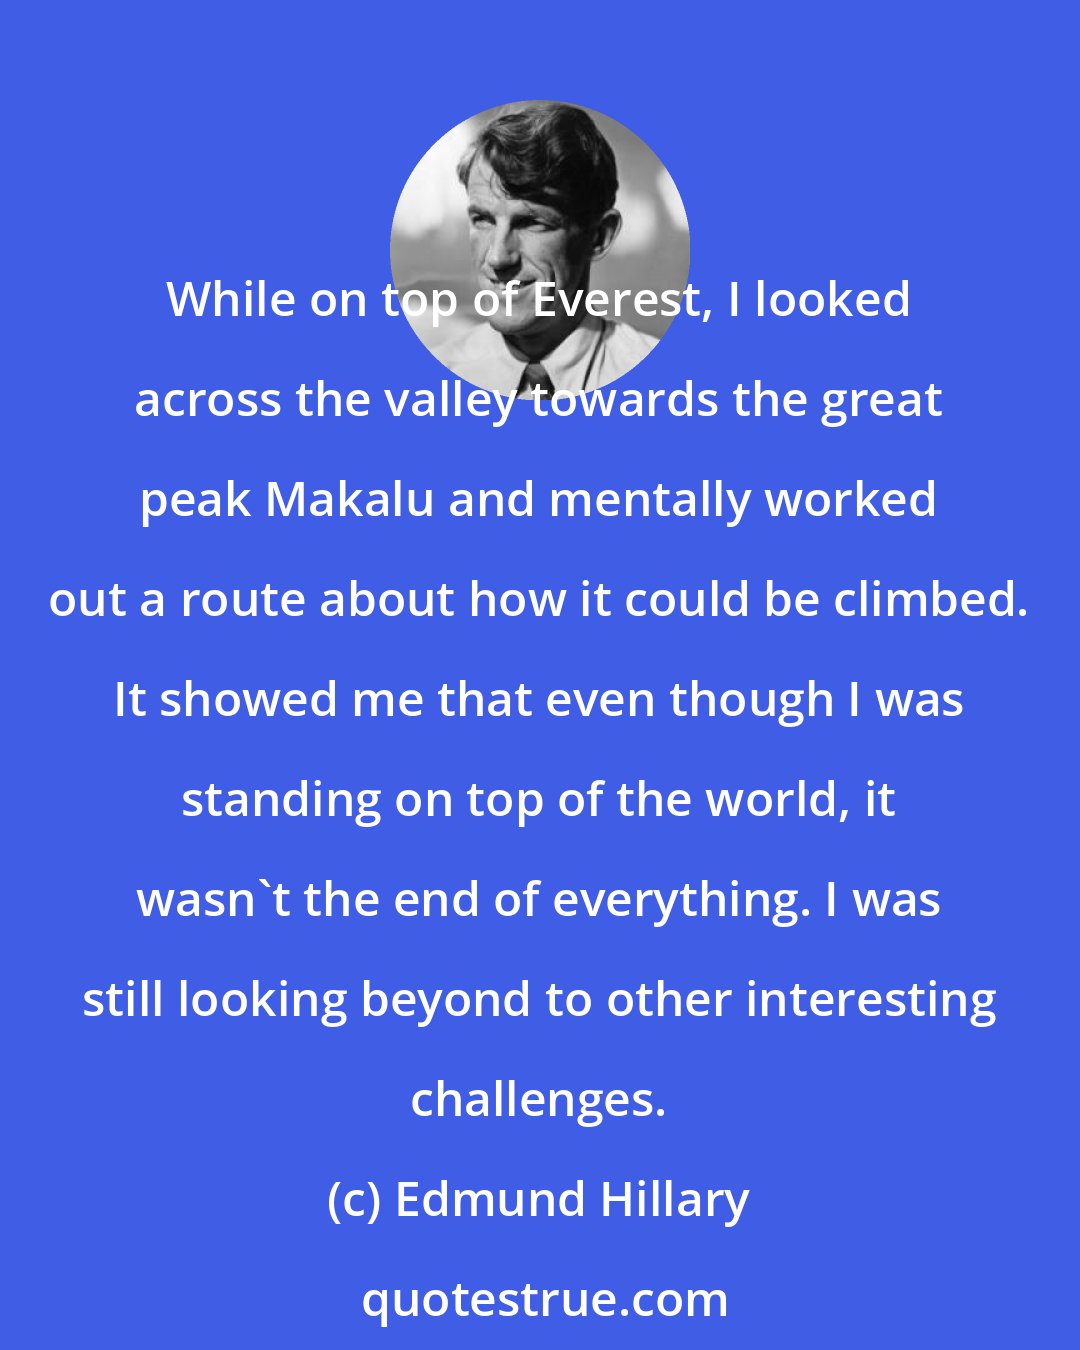 Edmund Hillary: While on top of Everest, I looked across the valley towards the great peak Makalu and mentally worked out a route about how it could be climbed. It showed me that even though I was standing on top of the world, it wasn't the end of everything. I was still looking beyond to other interesting challenges.